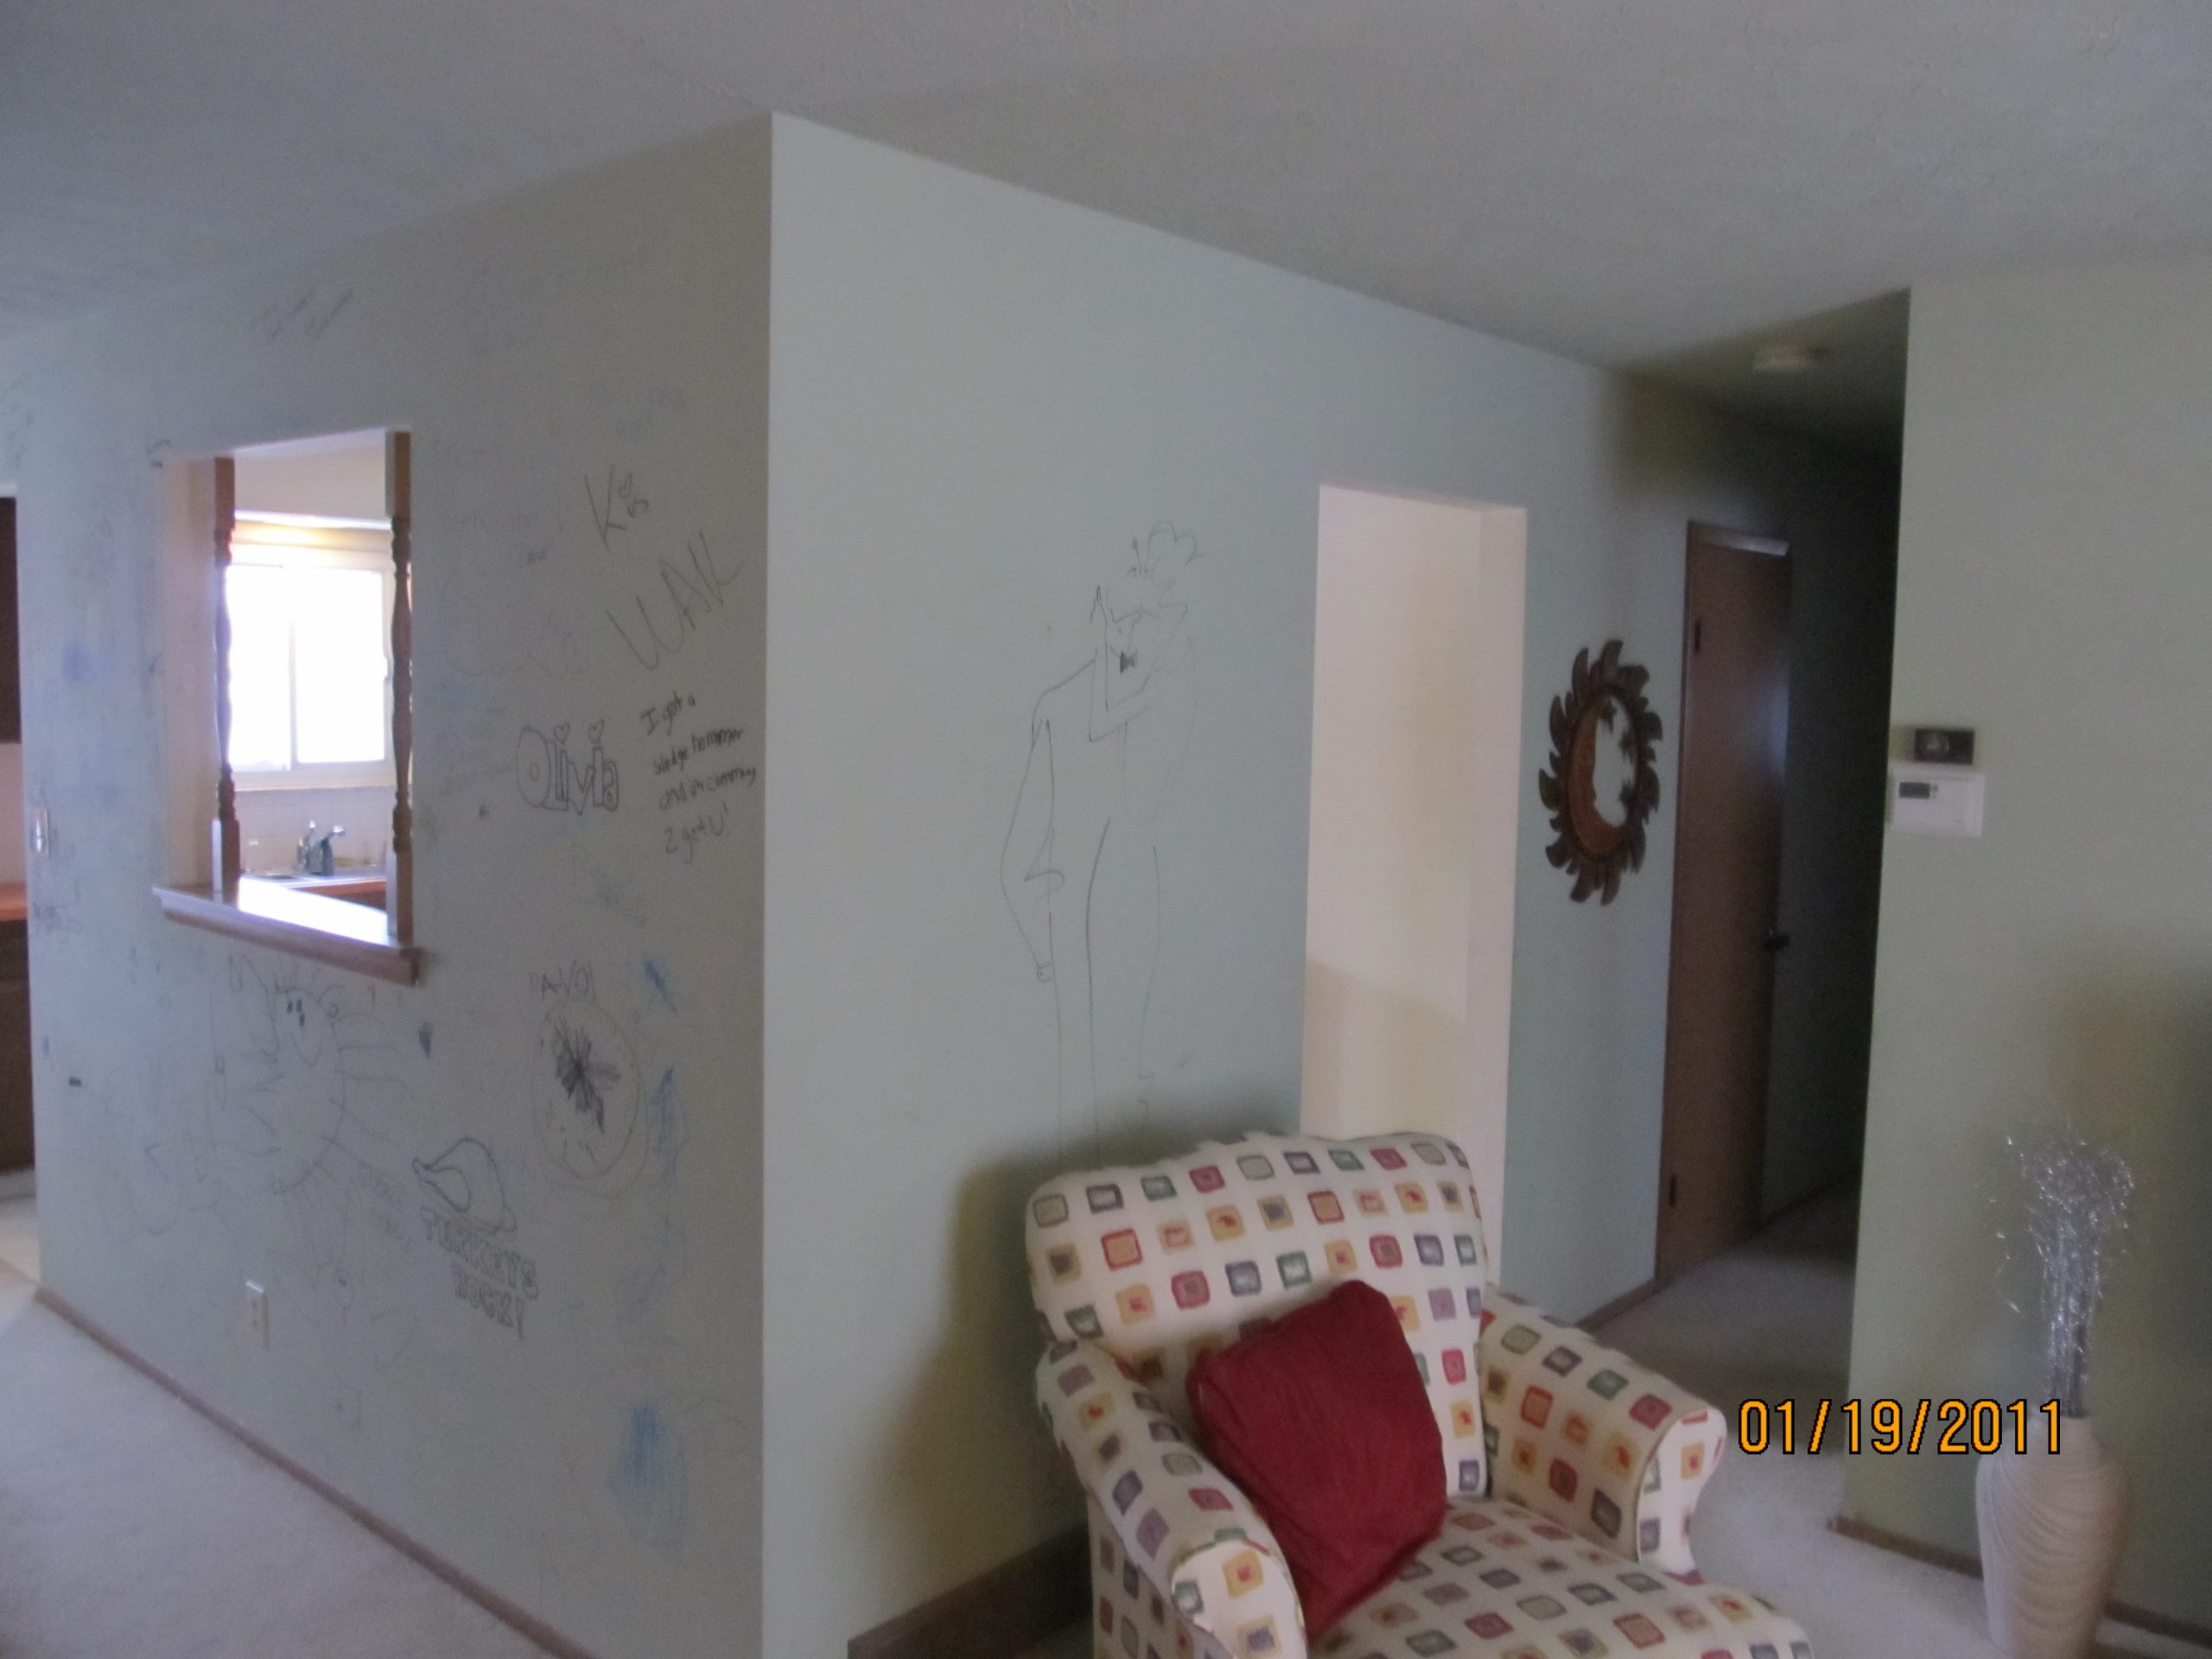 walls with drawings on them